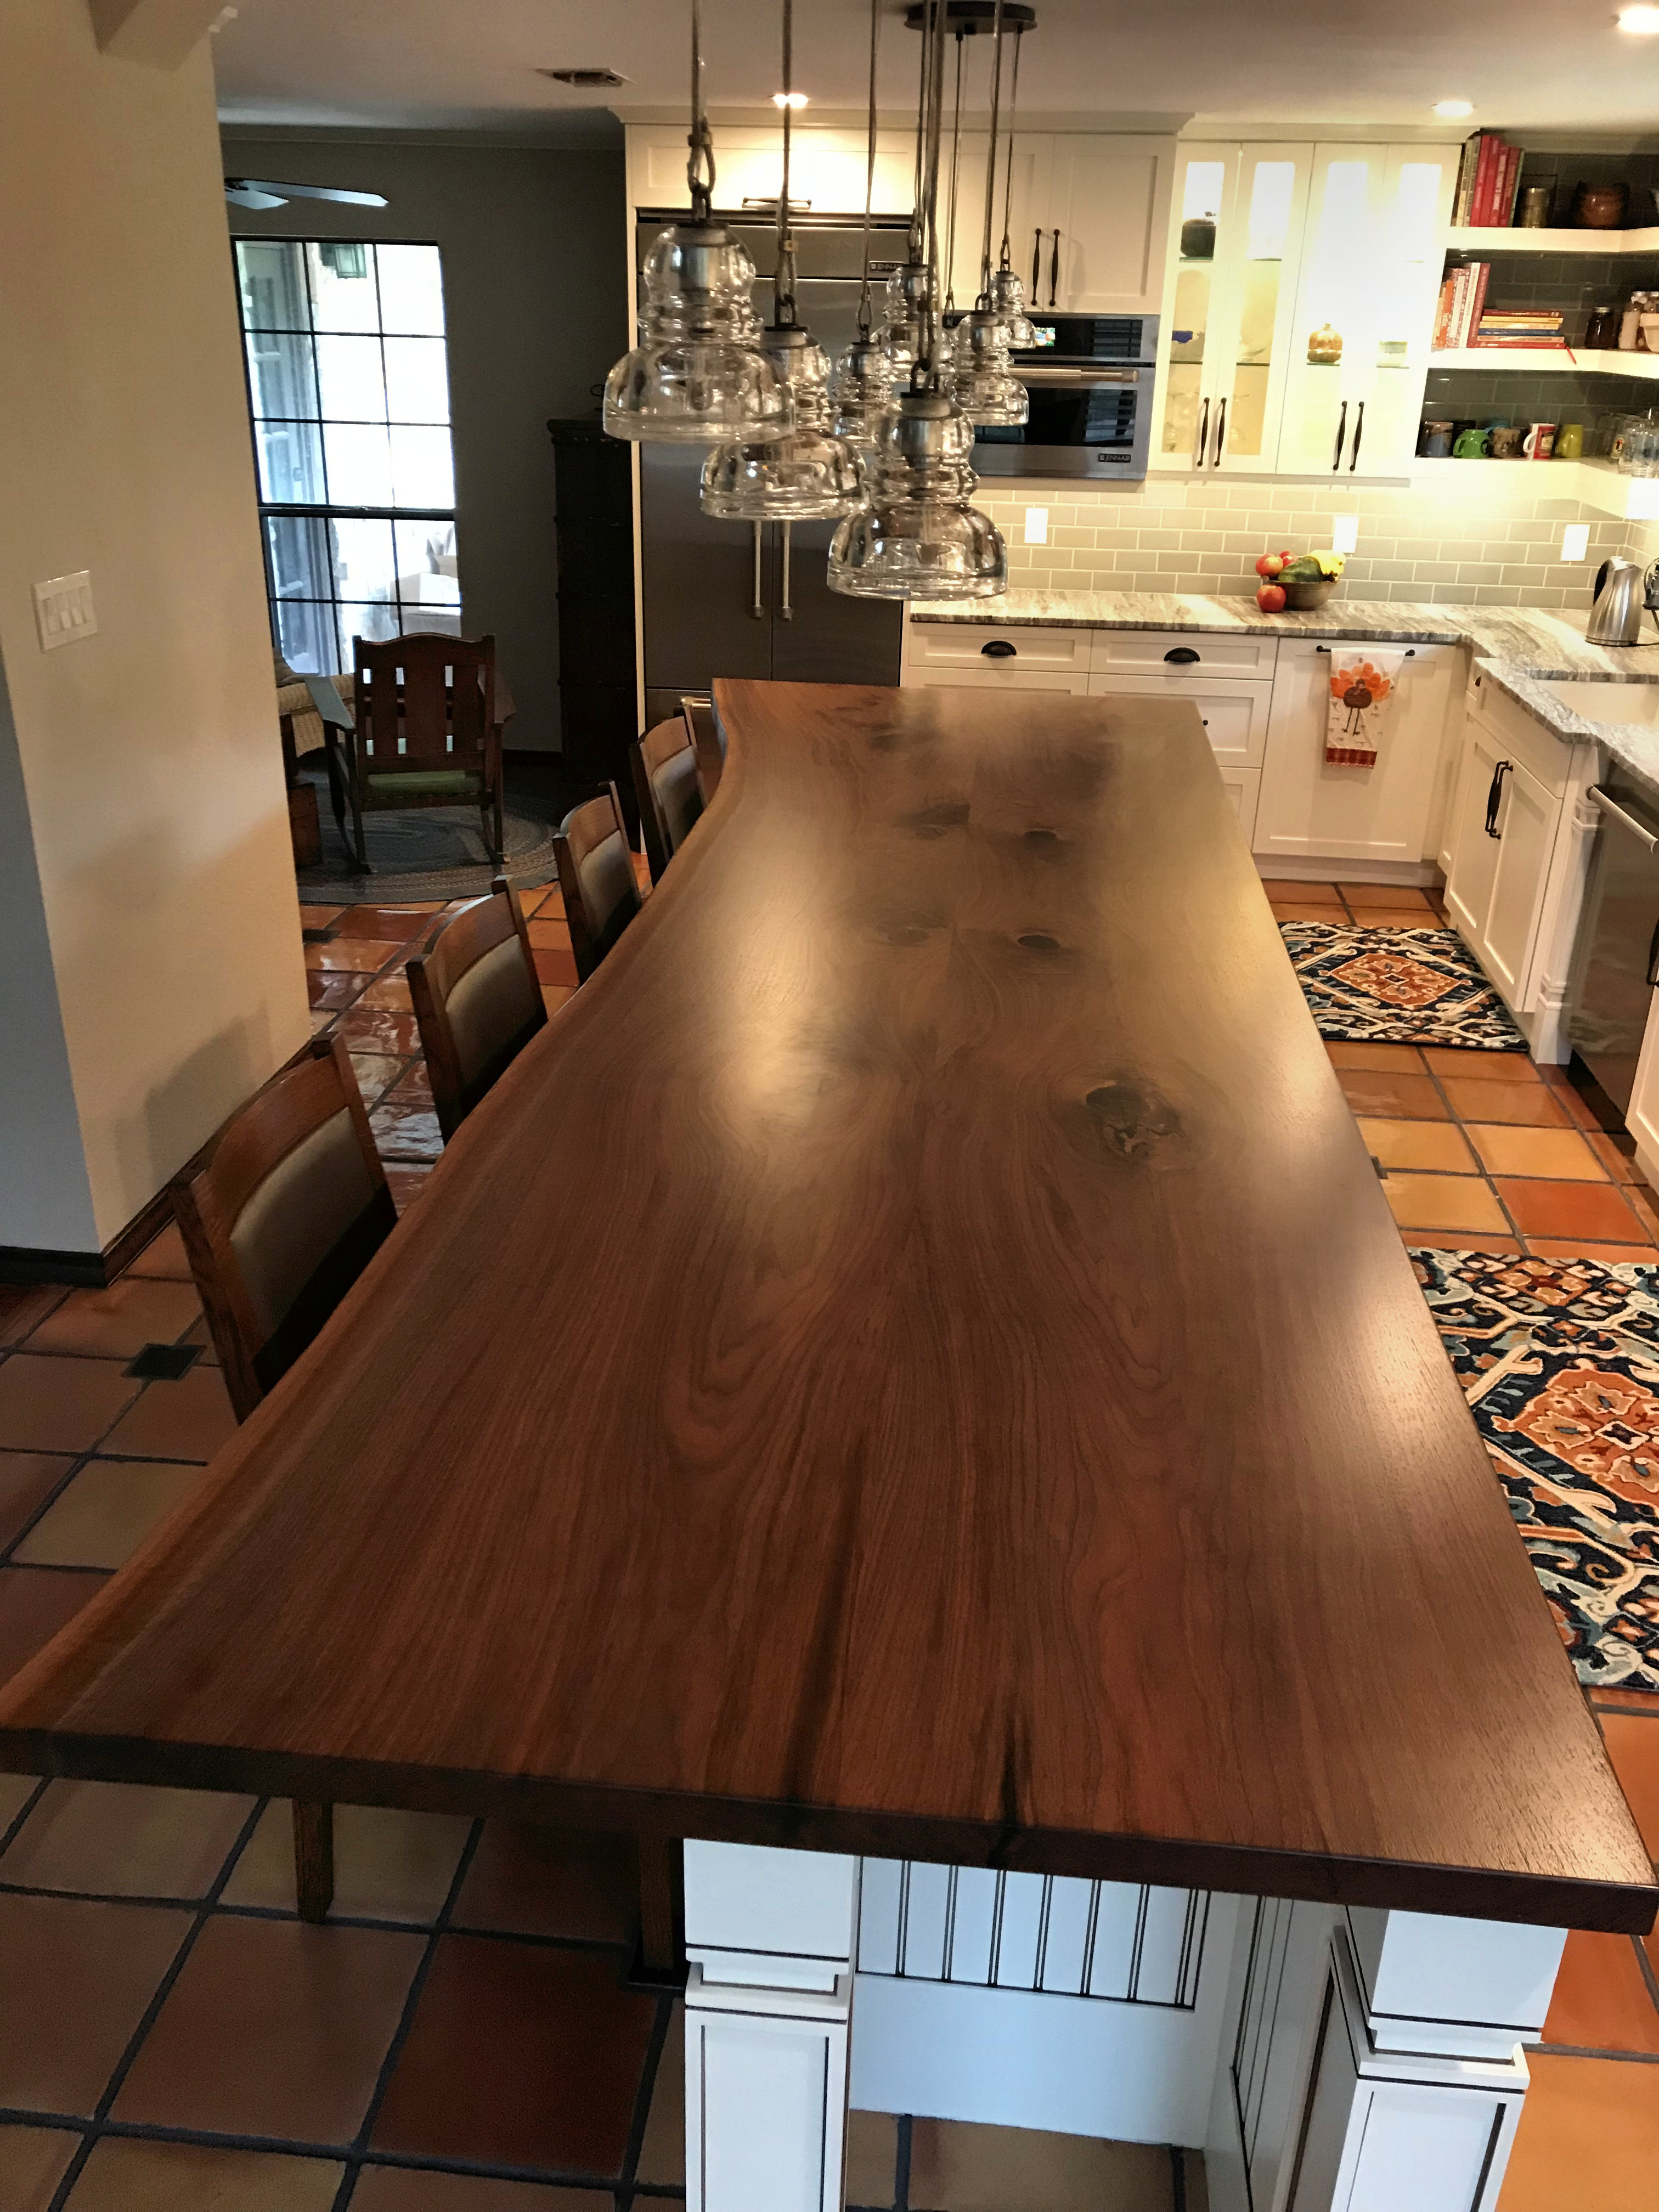 http://www.devoswoodworking.com/images/dcw/photo-gallery/wood-countertops/wood-countertops-slab-walnut-photos/slab-walnut-wood-countertops-img059.jpg